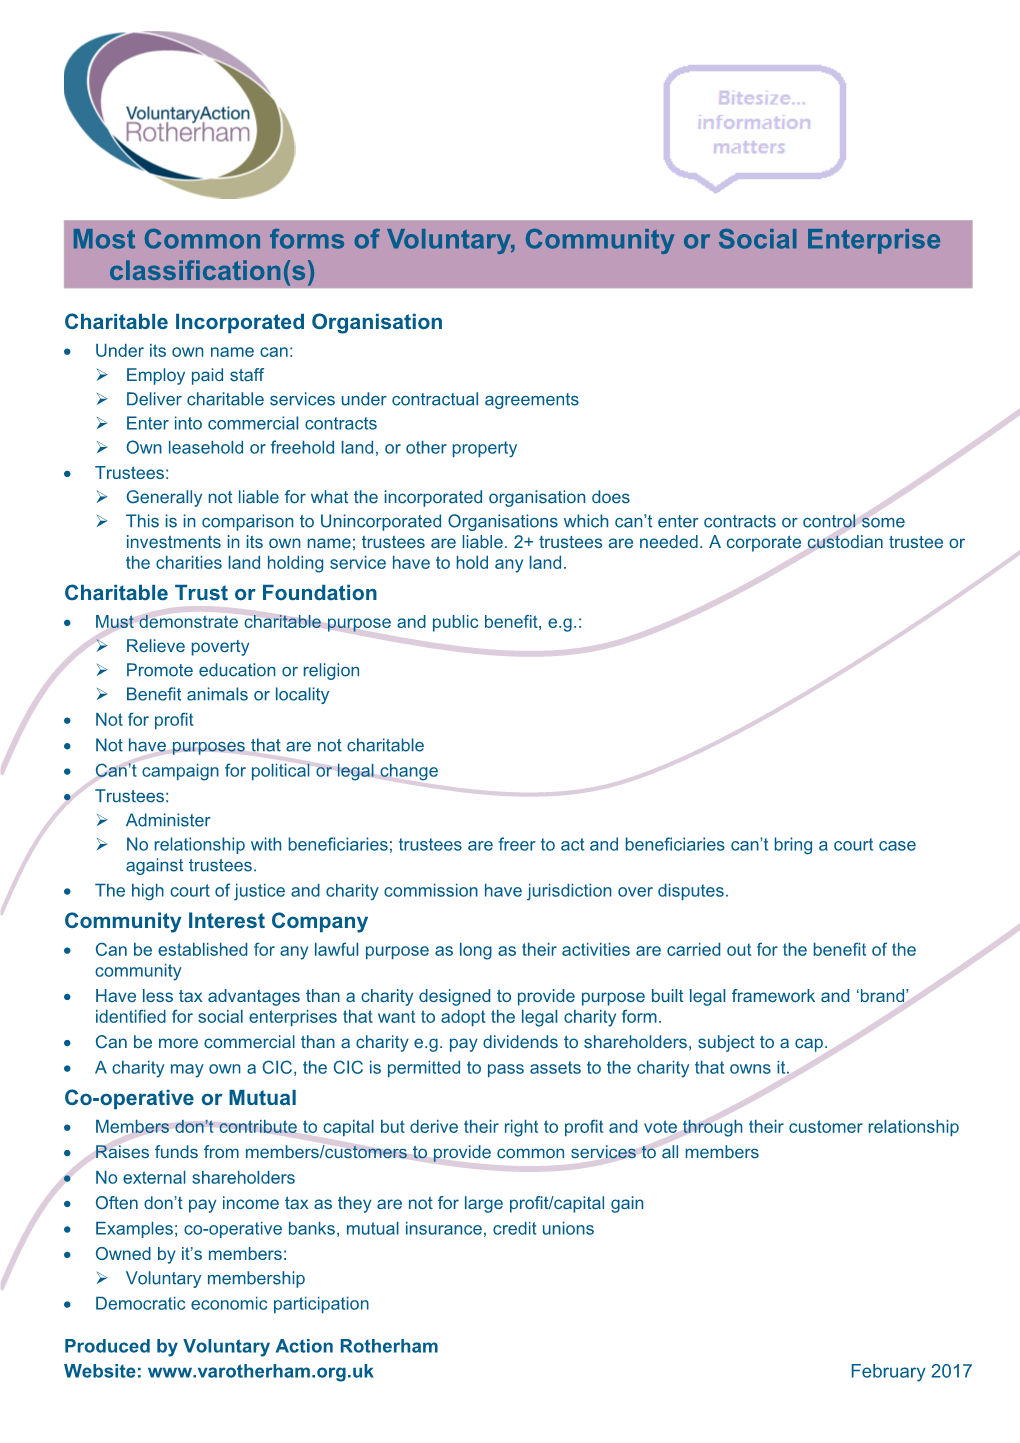 Most Common Forms of Voluntary, Community Or Social Enterprise Classification(S)